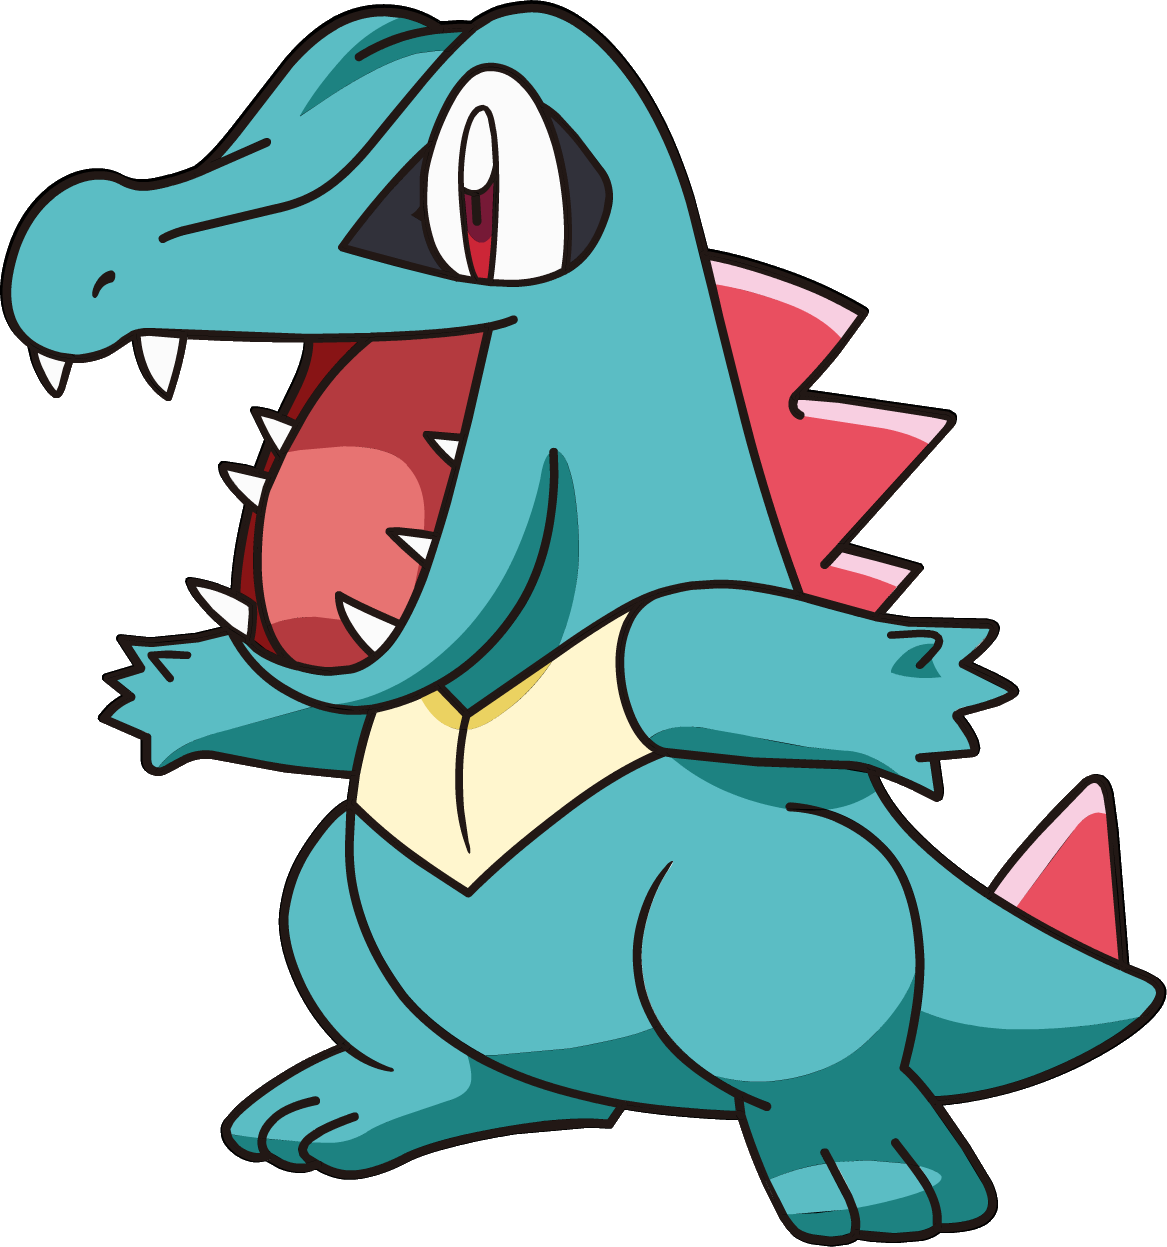 https://vignette.wikia.nocookie.net/pokemon/images/d/d6/158Totodile_OS_anime.png/revision/latest?cb=20150102063551